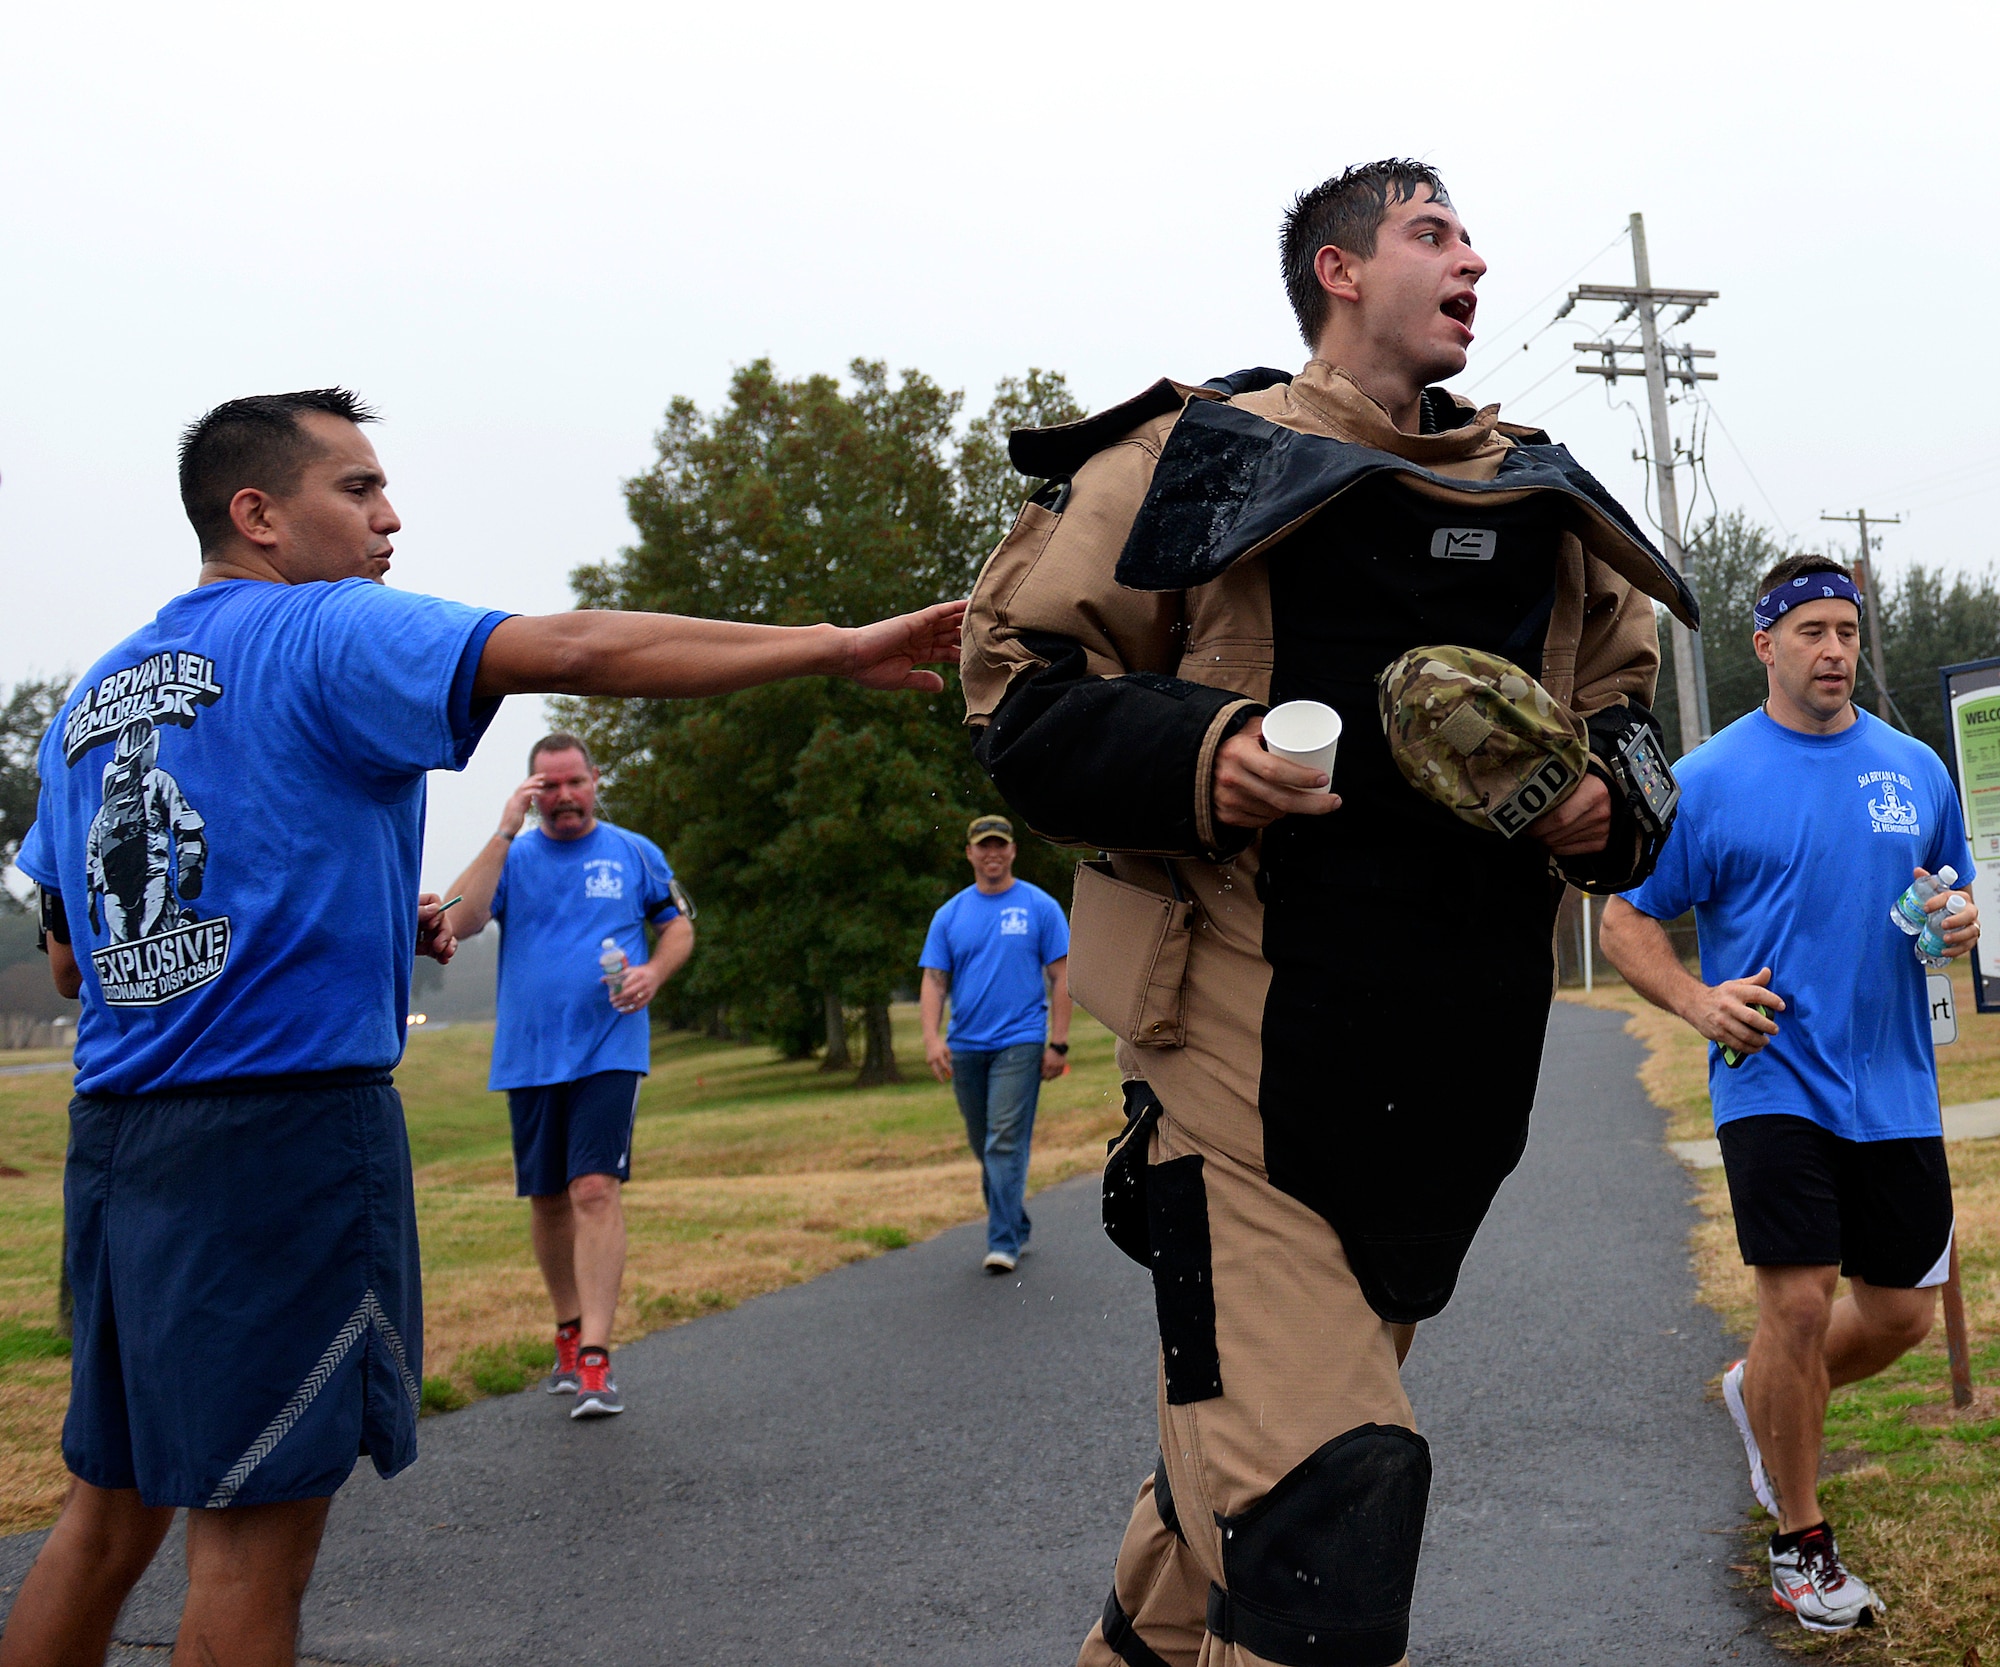 Team Barksdale supports Airman 1st Class Alex Keskinen, 2nd Civil Engineer Squadron Explosive Ordnance Disposal technician, as he prepares to enter the final leg of the first SrA Bryan R. Bell 5K Memorial Run on Barksdale Air Force Base, La., Dec. 5, 2014. The run honored Bell, who gave his life defending his country in Afghanistan in 2012 in support of Operation Enduring Freedom. (U.S. Air Force photo/Airman 1st Class Curt Beach)